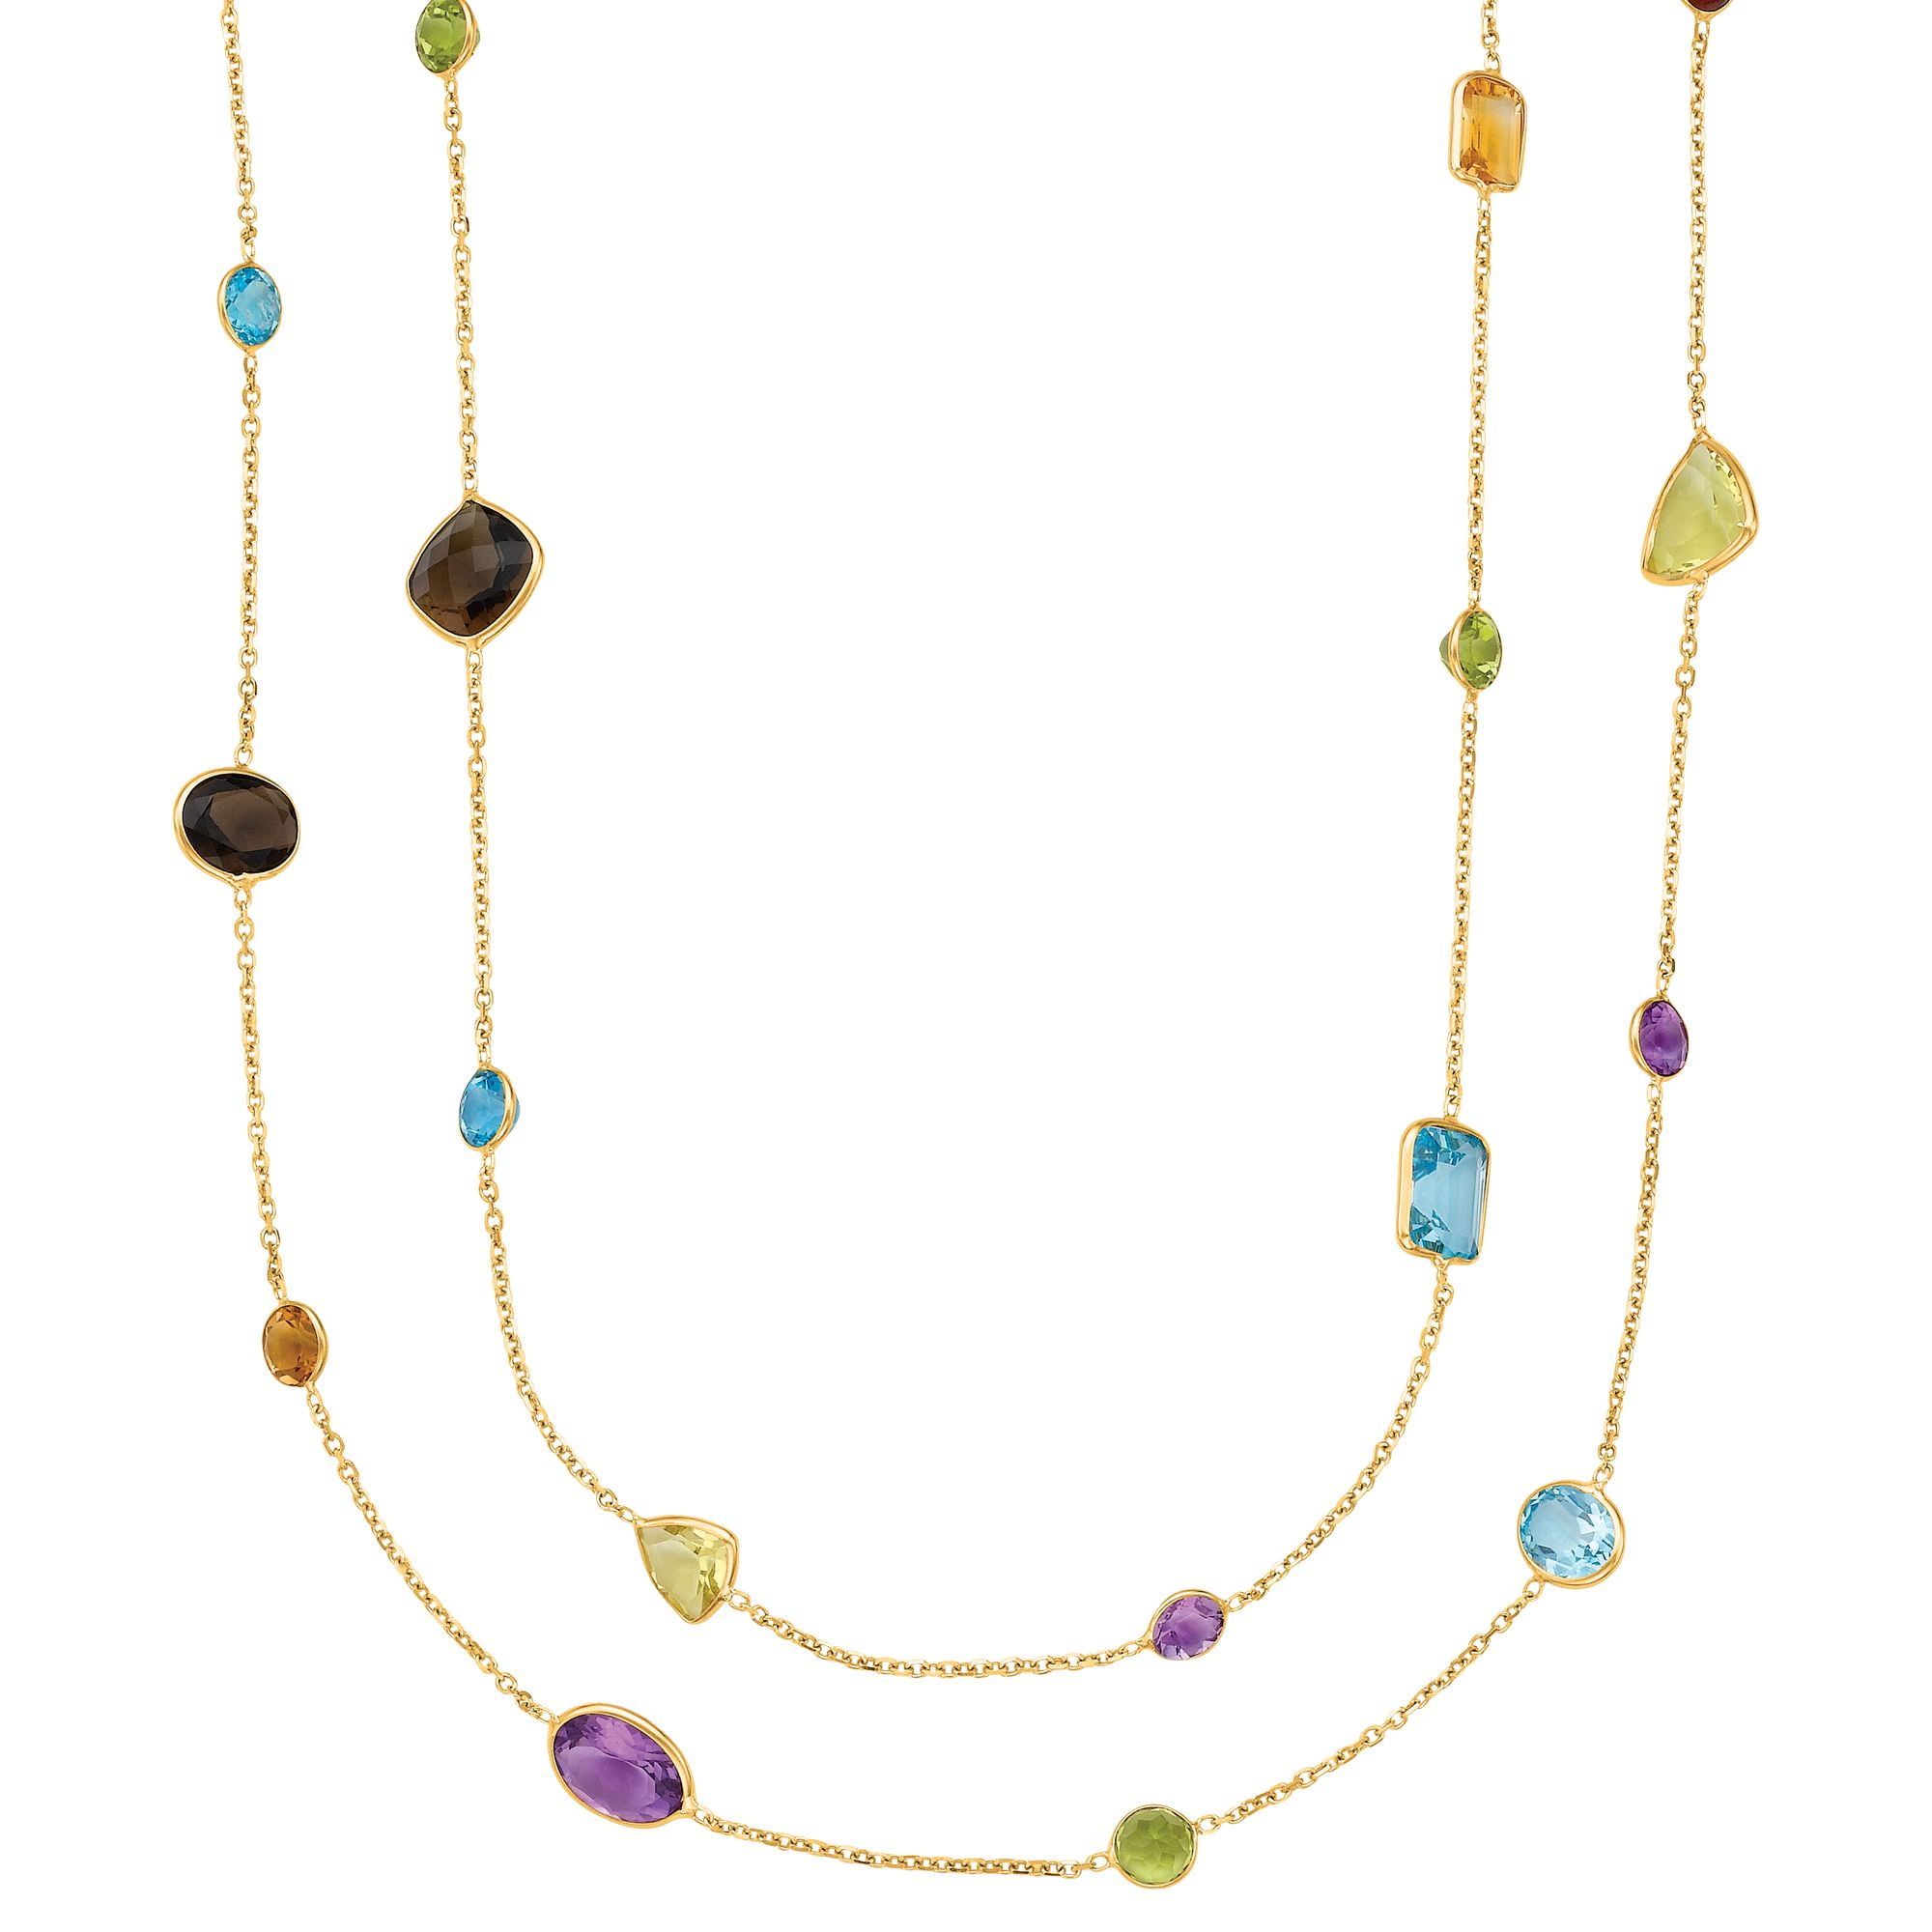 Multicolor Gemstones 18 Inches Necklace 14k Yellow Gold Chain with Lobster Lock